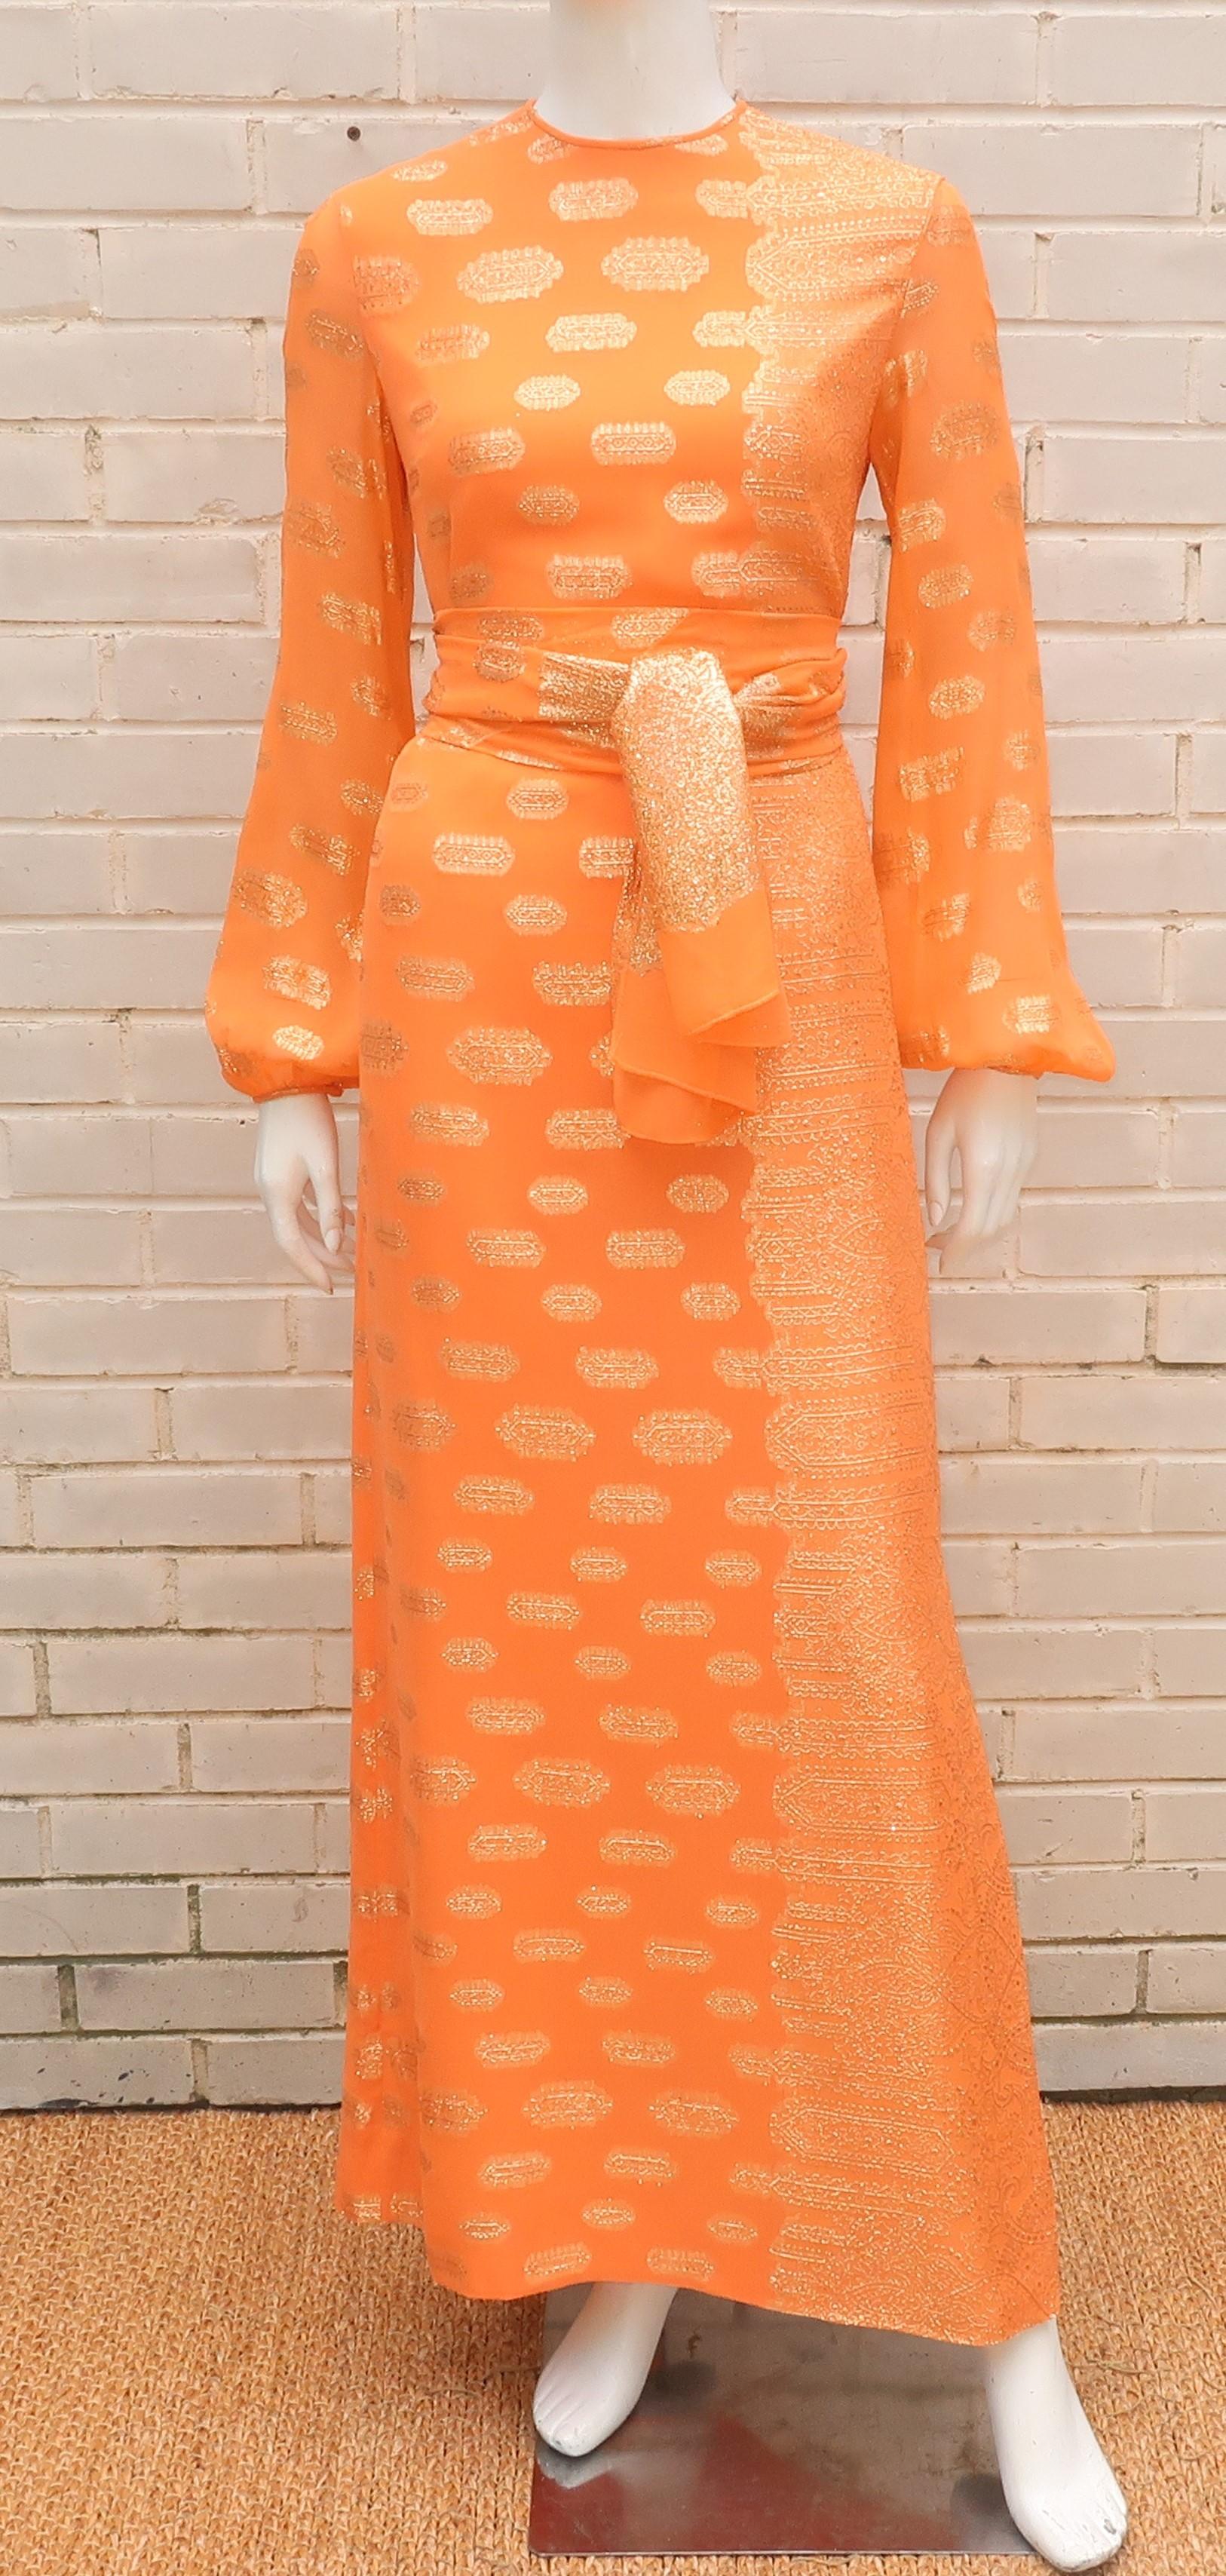 1970's Anthony Muto maxi evening dress in a wonderful cantaloupe orange georgette fabric embellished with exotic gold lamé threading.  The comfortable sheath style design zips and hooks at the back with sheer sleeves and a full lining through the